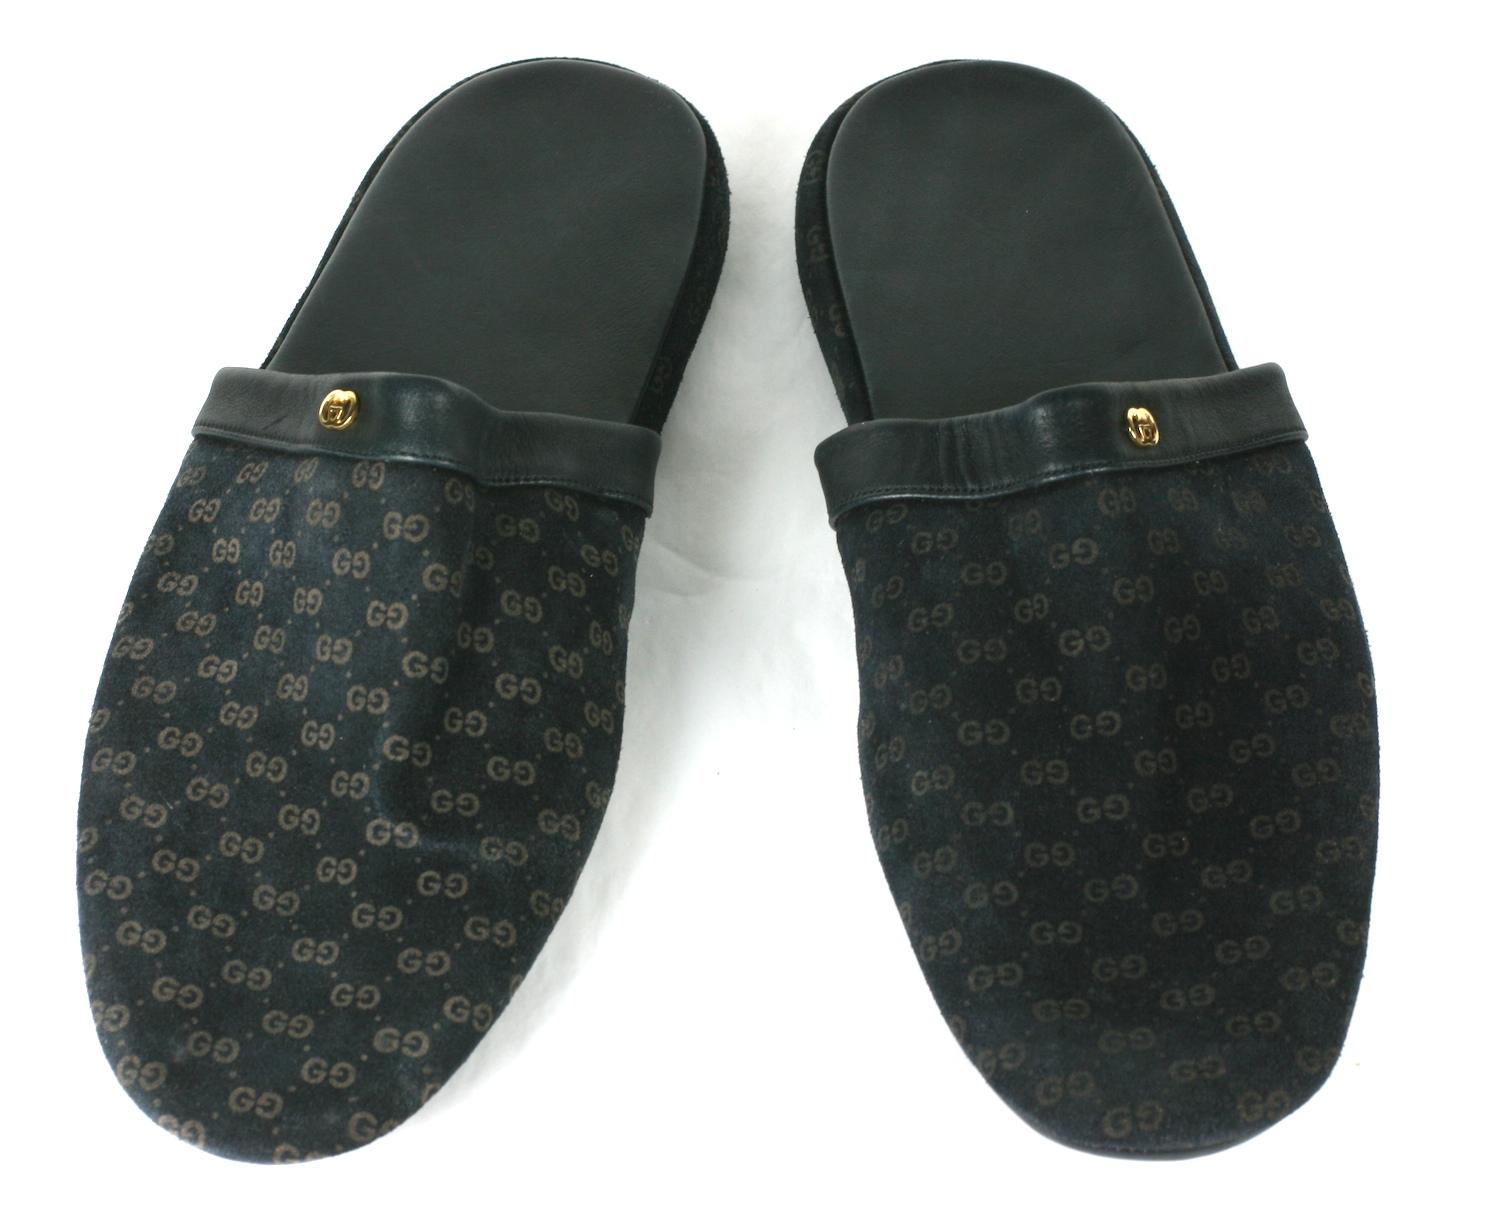 Gucci Embossed Logo Slippers in navy suede with original travel pouch. A gold 